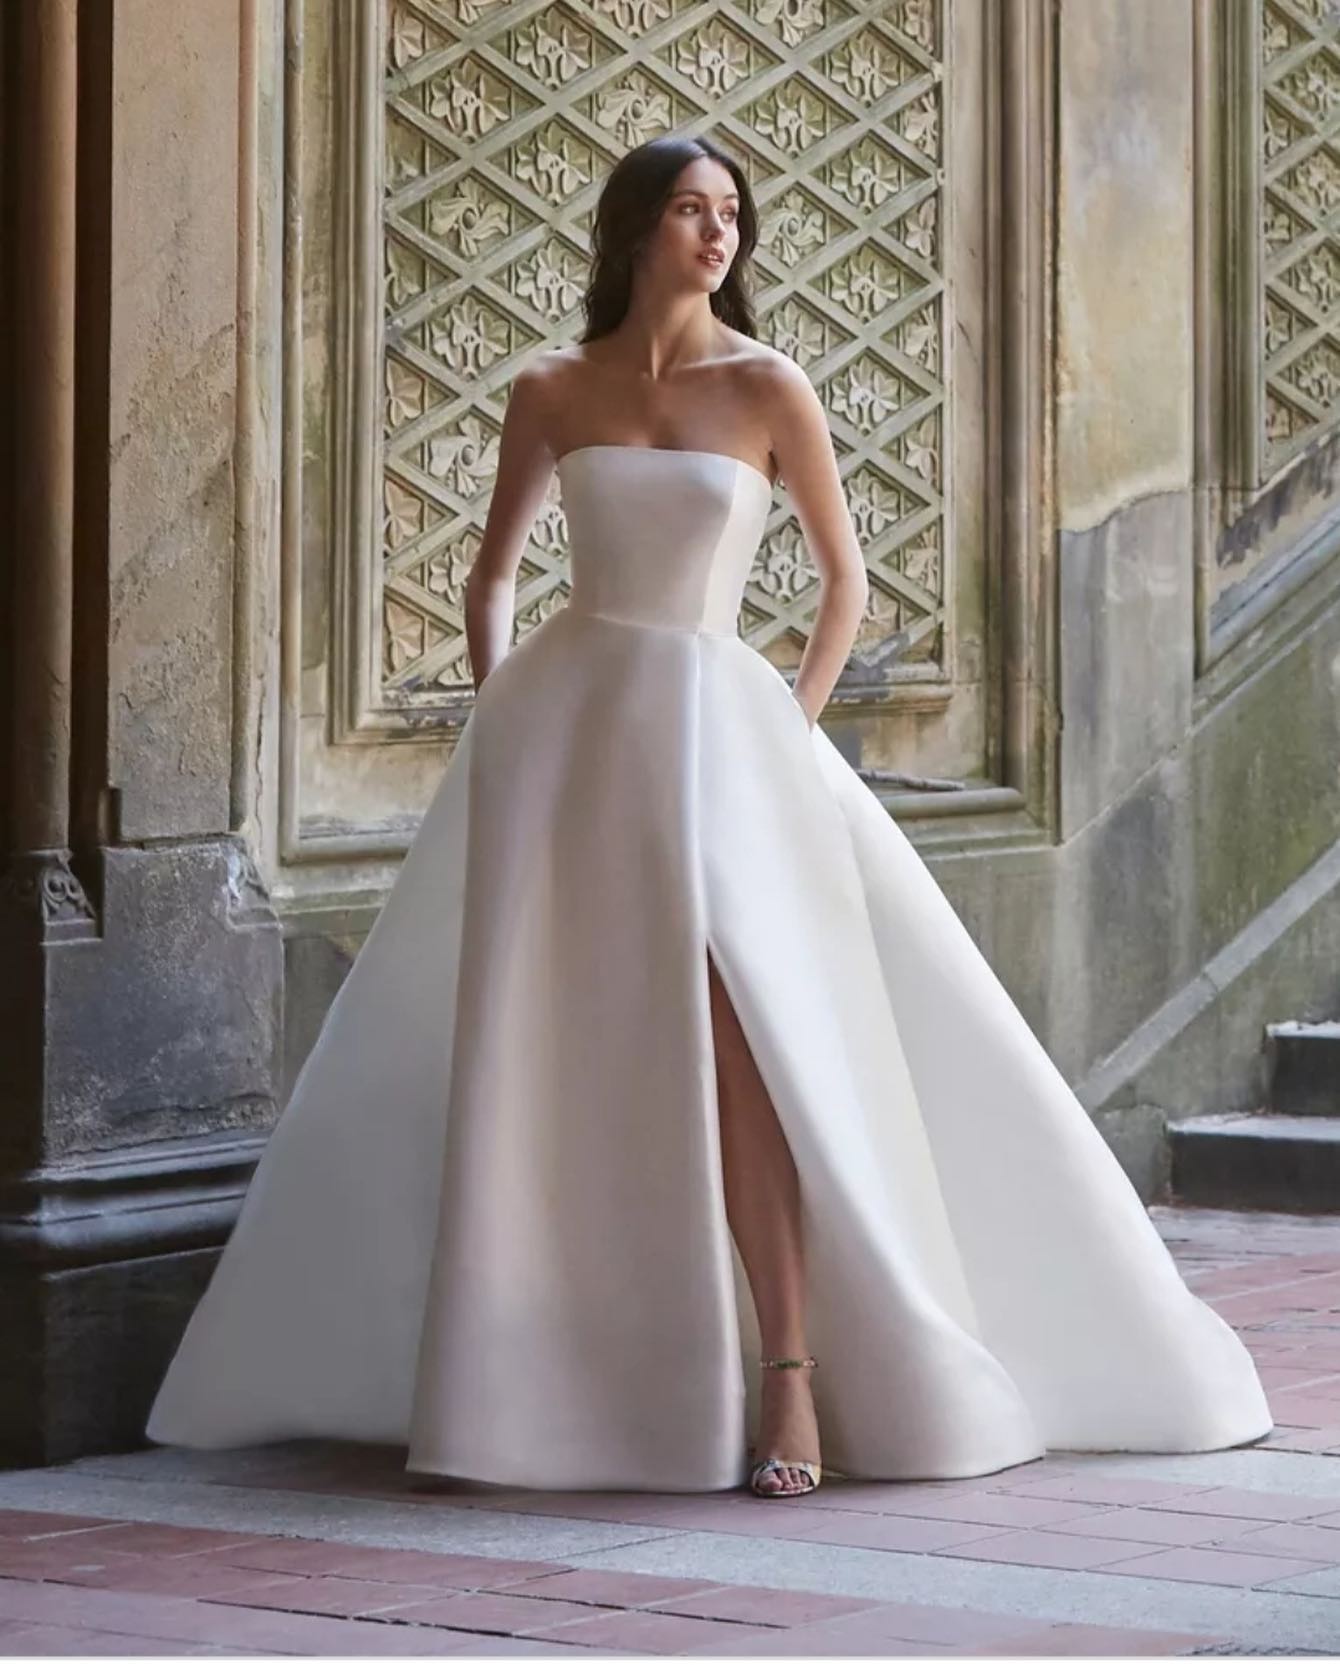 Image for post: Our Newest Dress at Isabella Margianu Bridal